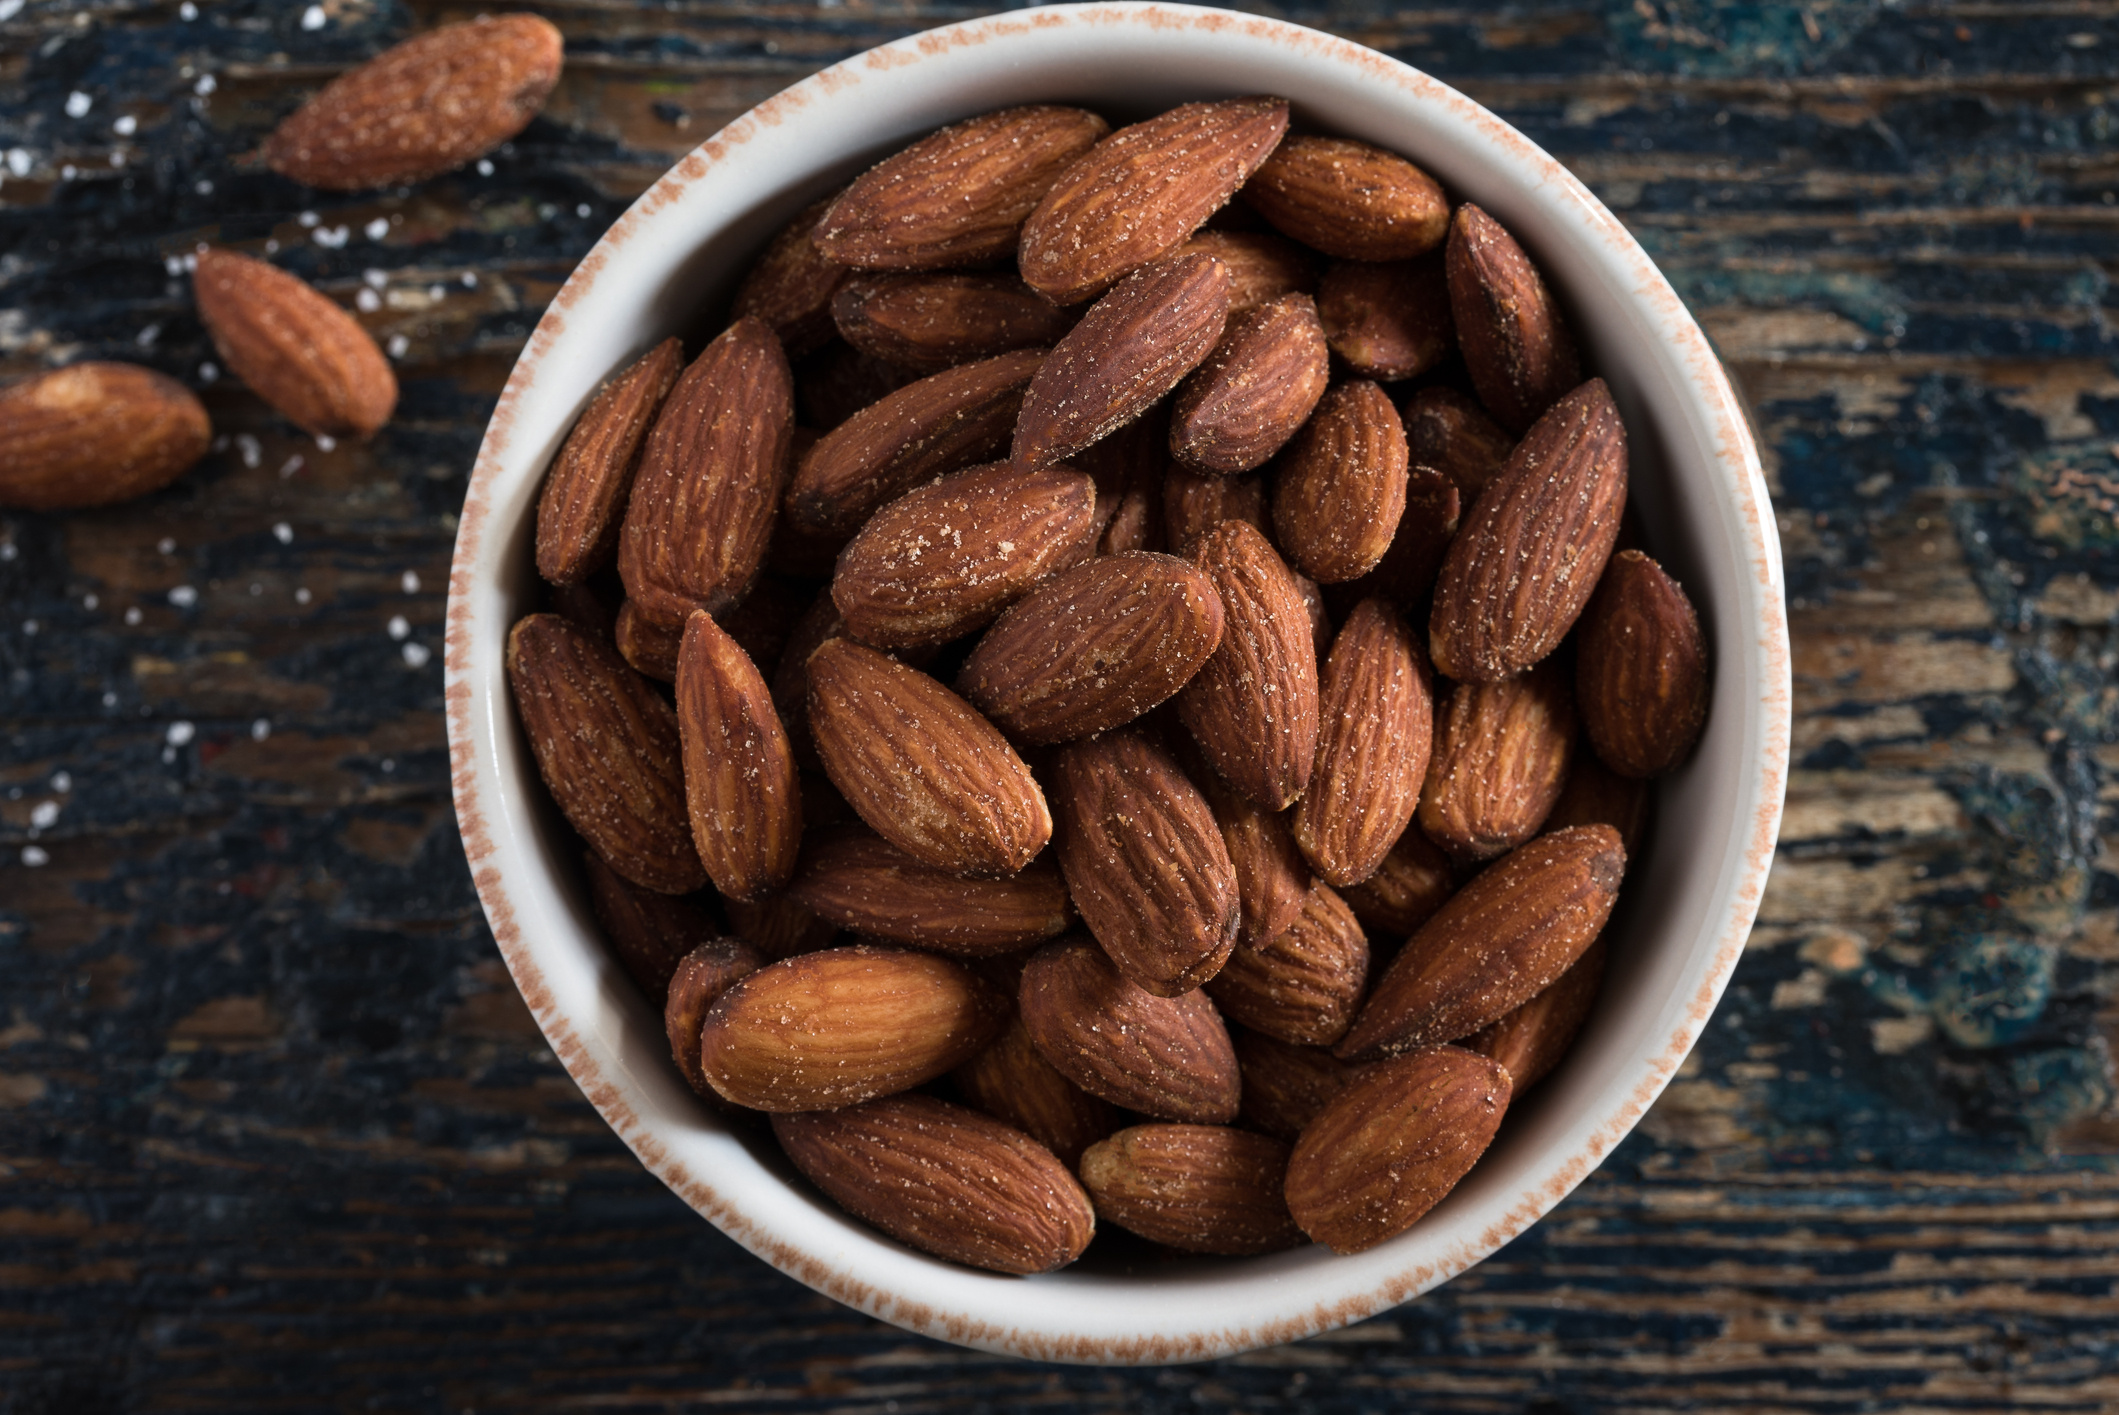 Almonds: A good source of nutrients, vitamin E, magnesium, Naturally low in sugars. 2120x1420 HD Wallpaper.